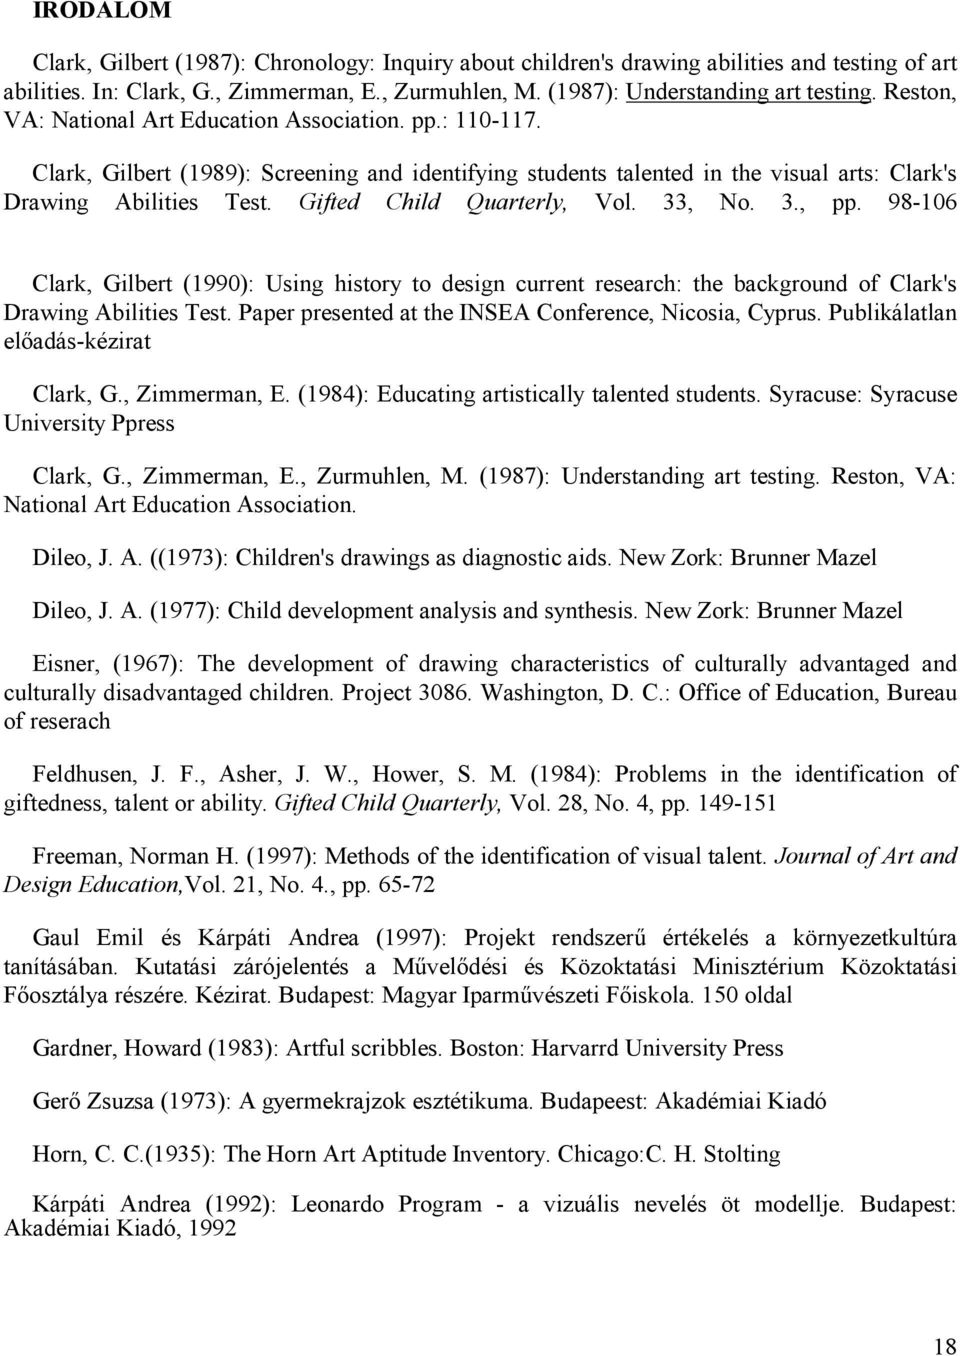 Gifted Child Quarterly, Vol. 33, No. 3., pp. 98-106 Clark, Gilbert (1990): Using history to design current research: the background of Clark's Drawing Abilities Test.